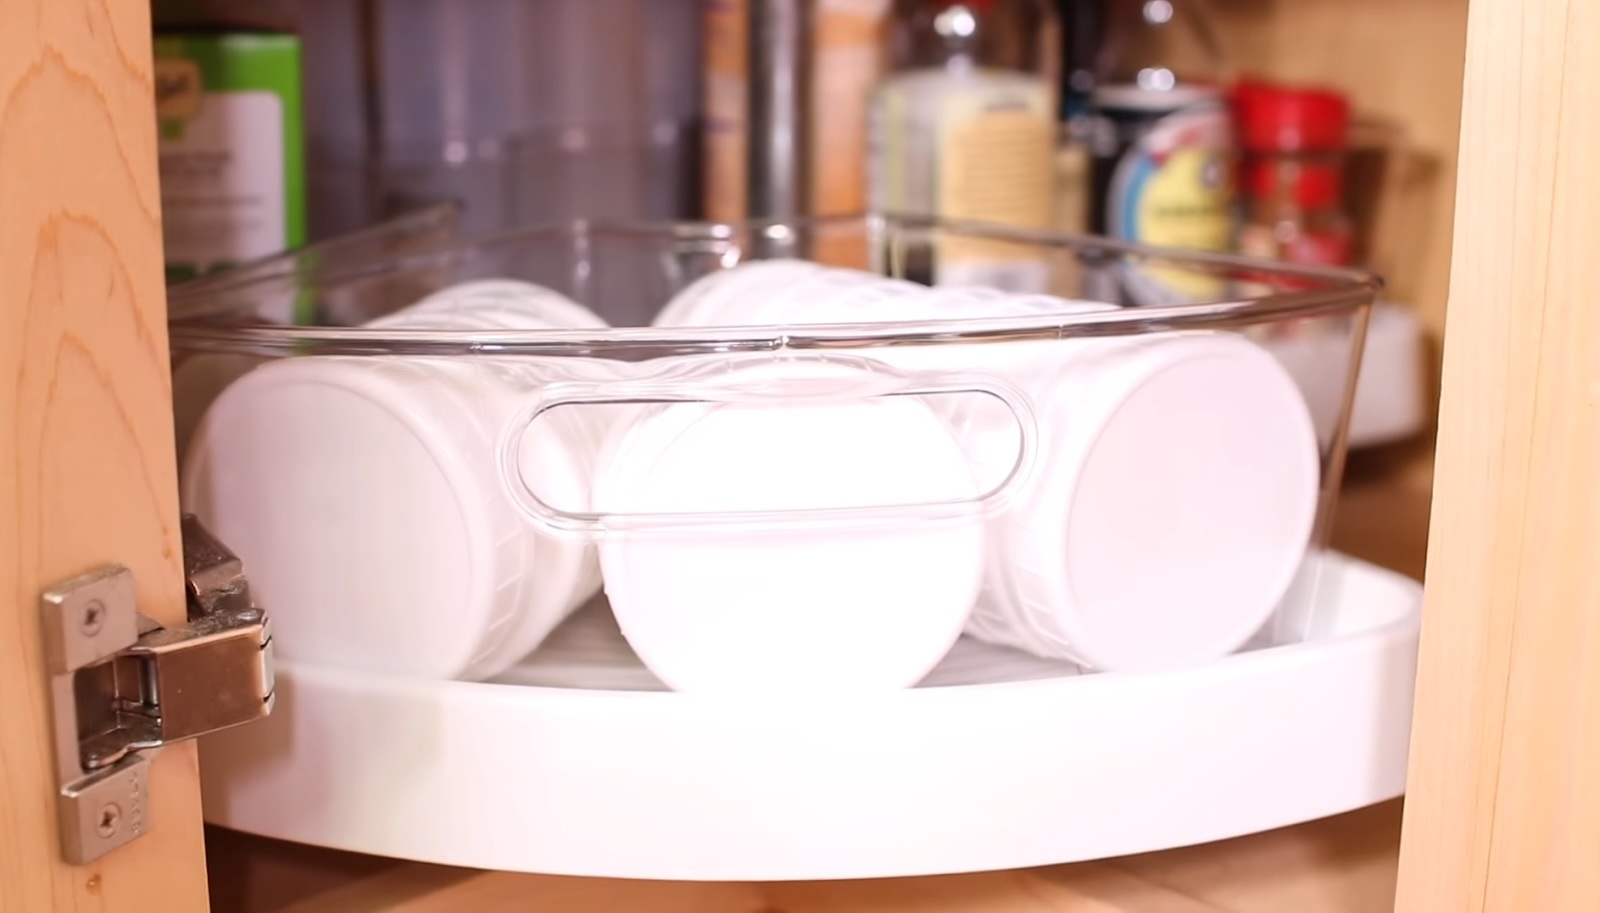 How To Organize Tupperware In A Lazy Susan